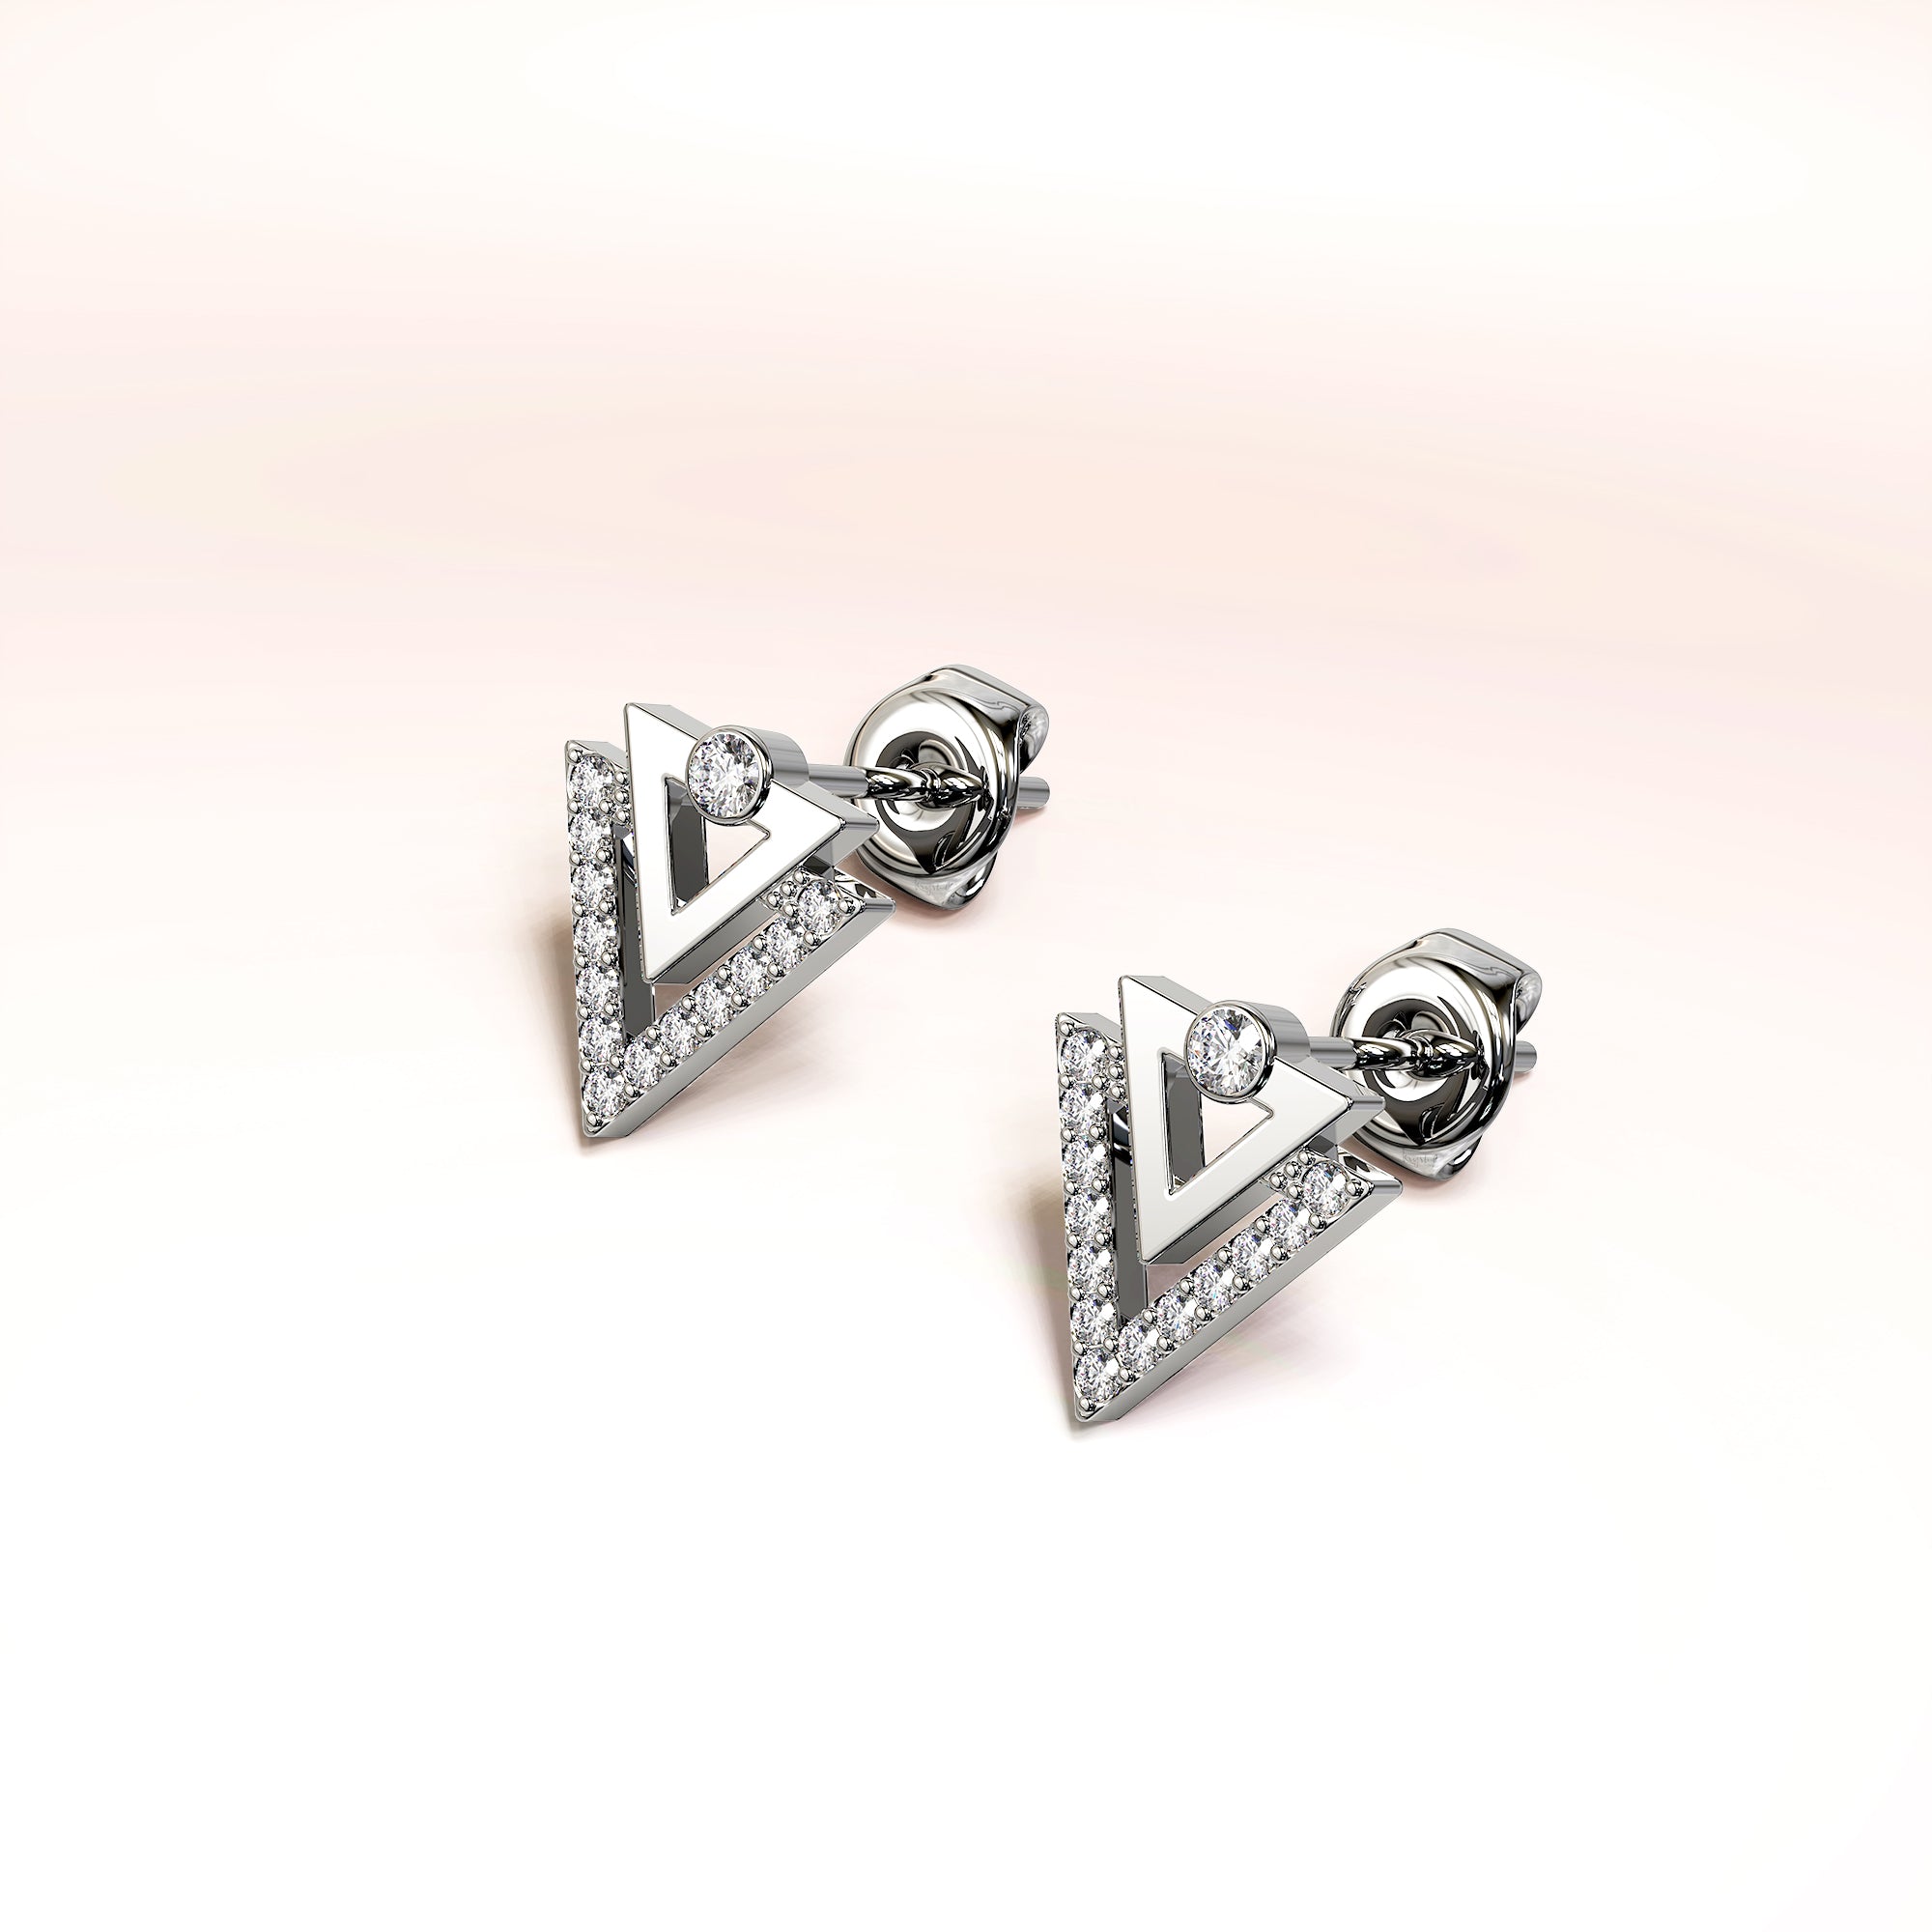 Trilateral Stud Earrings Embellished with Crystals from SWAROVSKI® in White Gold